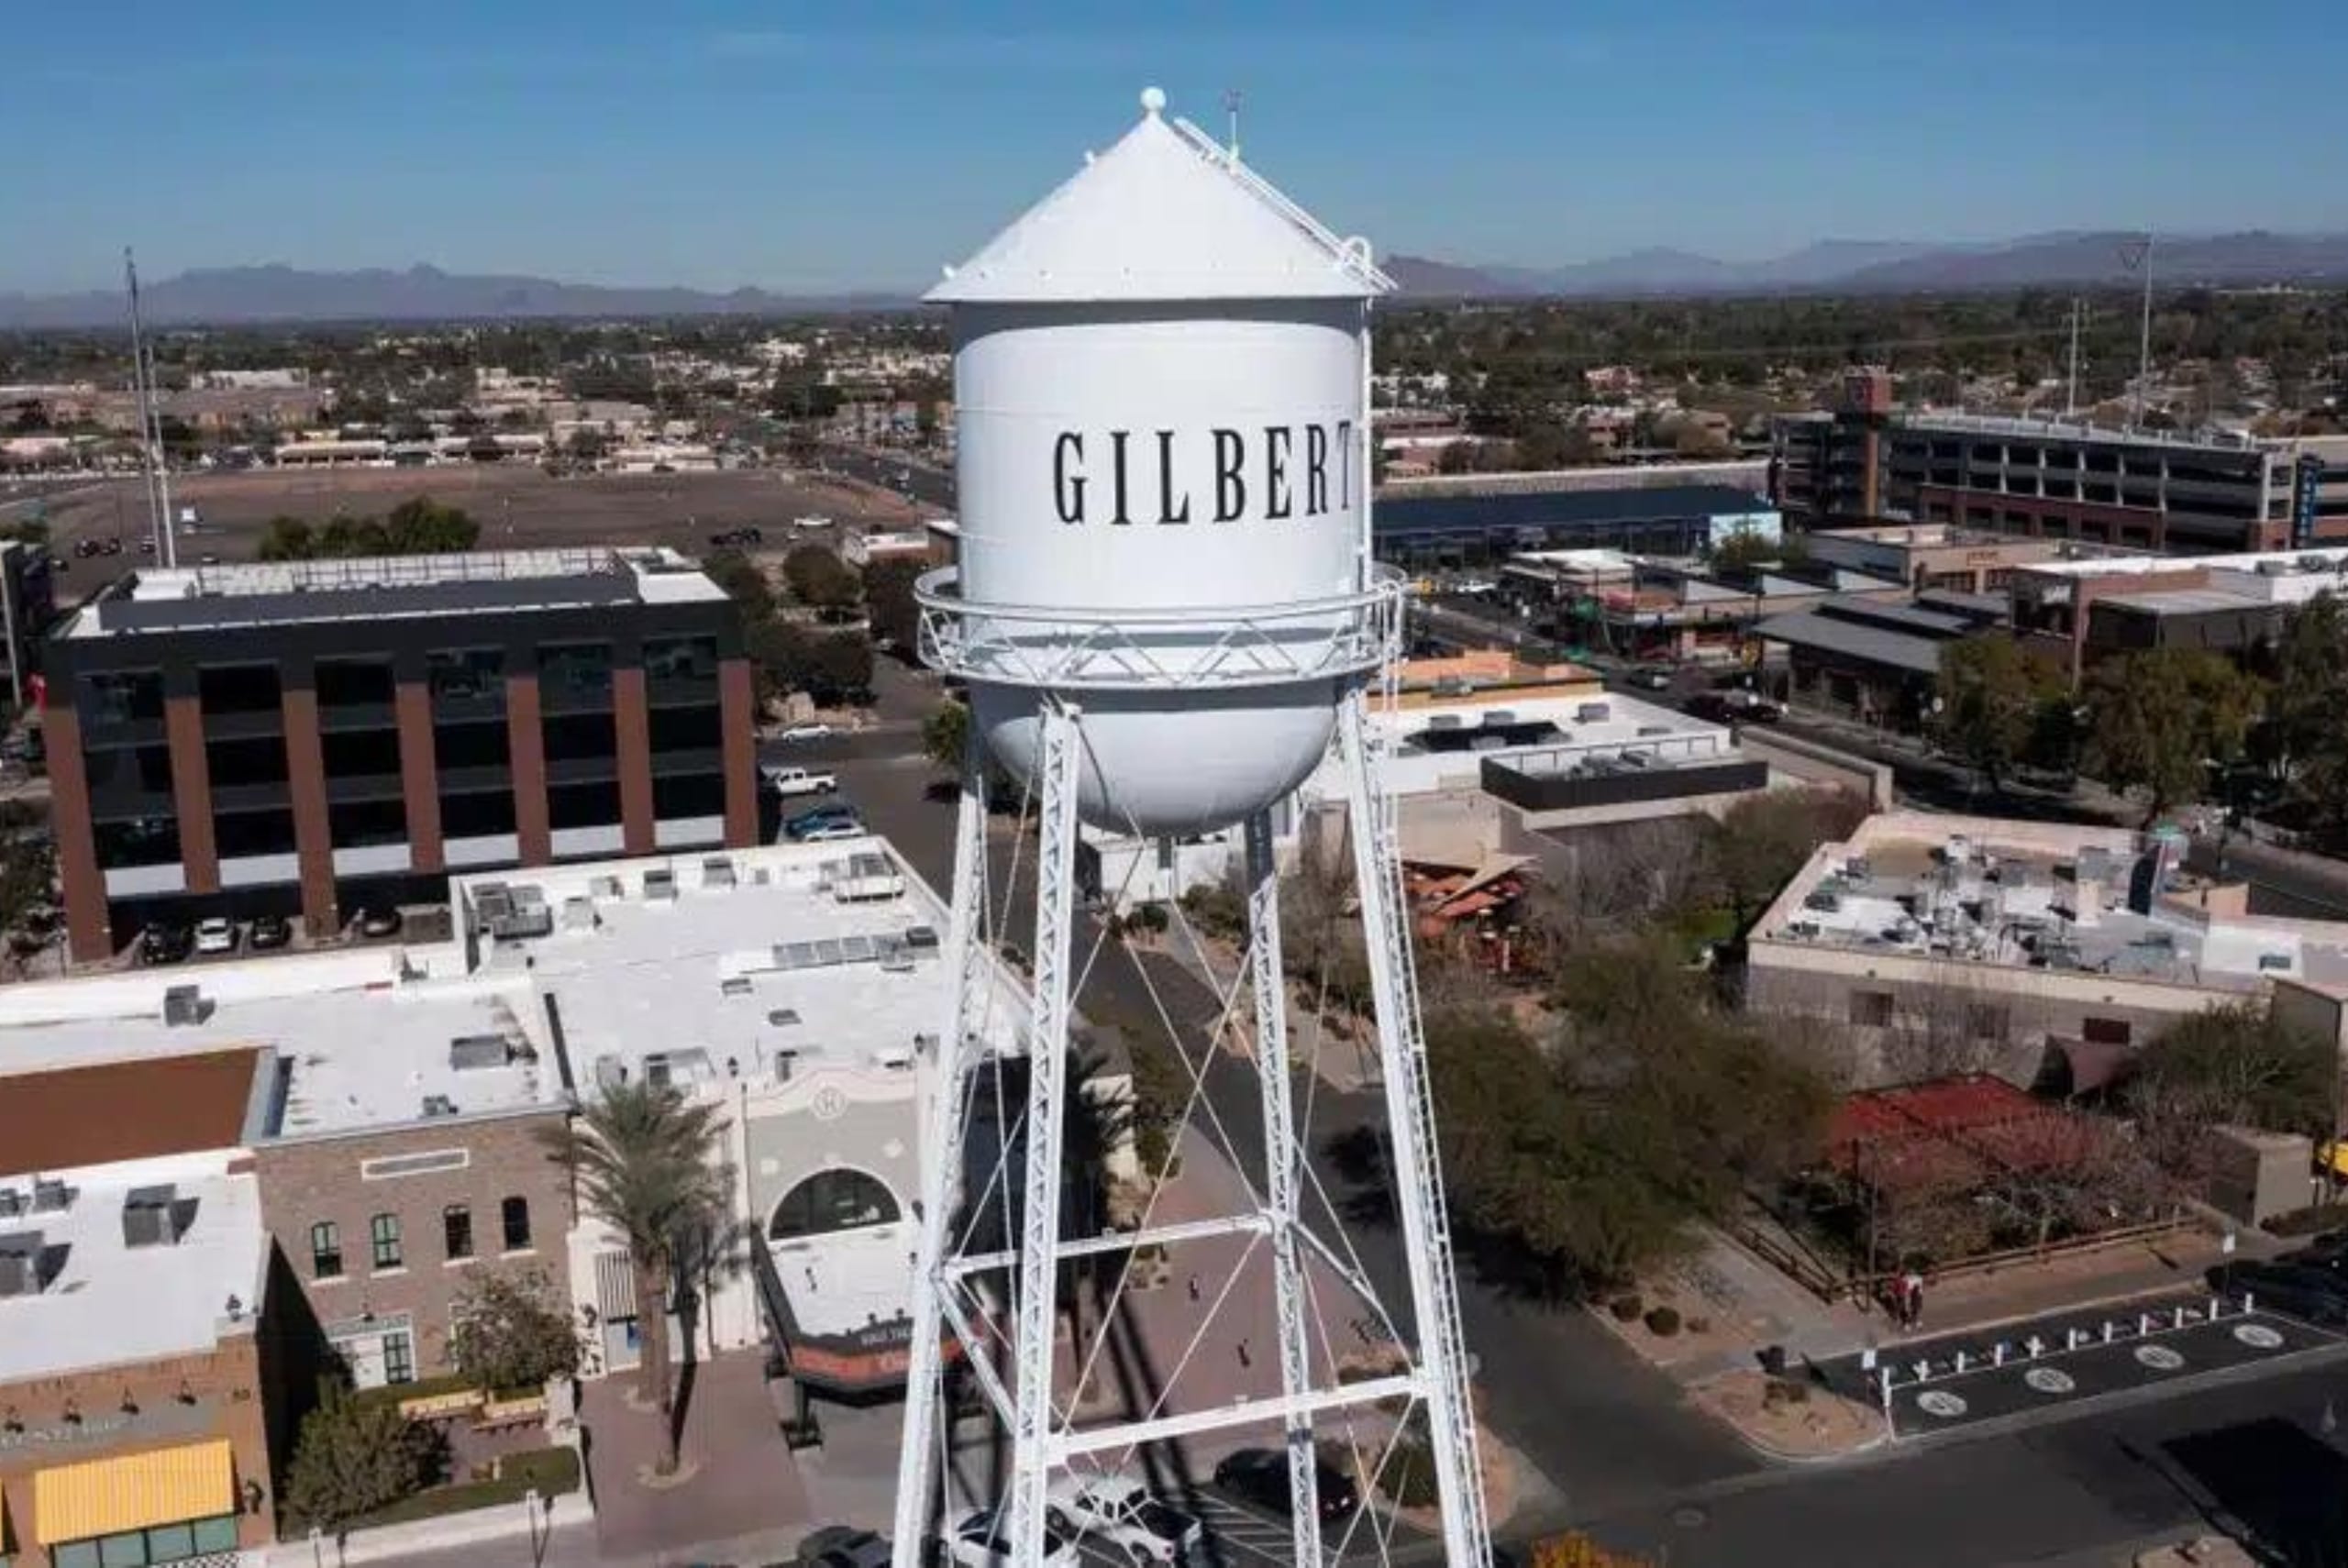 The water tower in downtown Gilbert, AZ